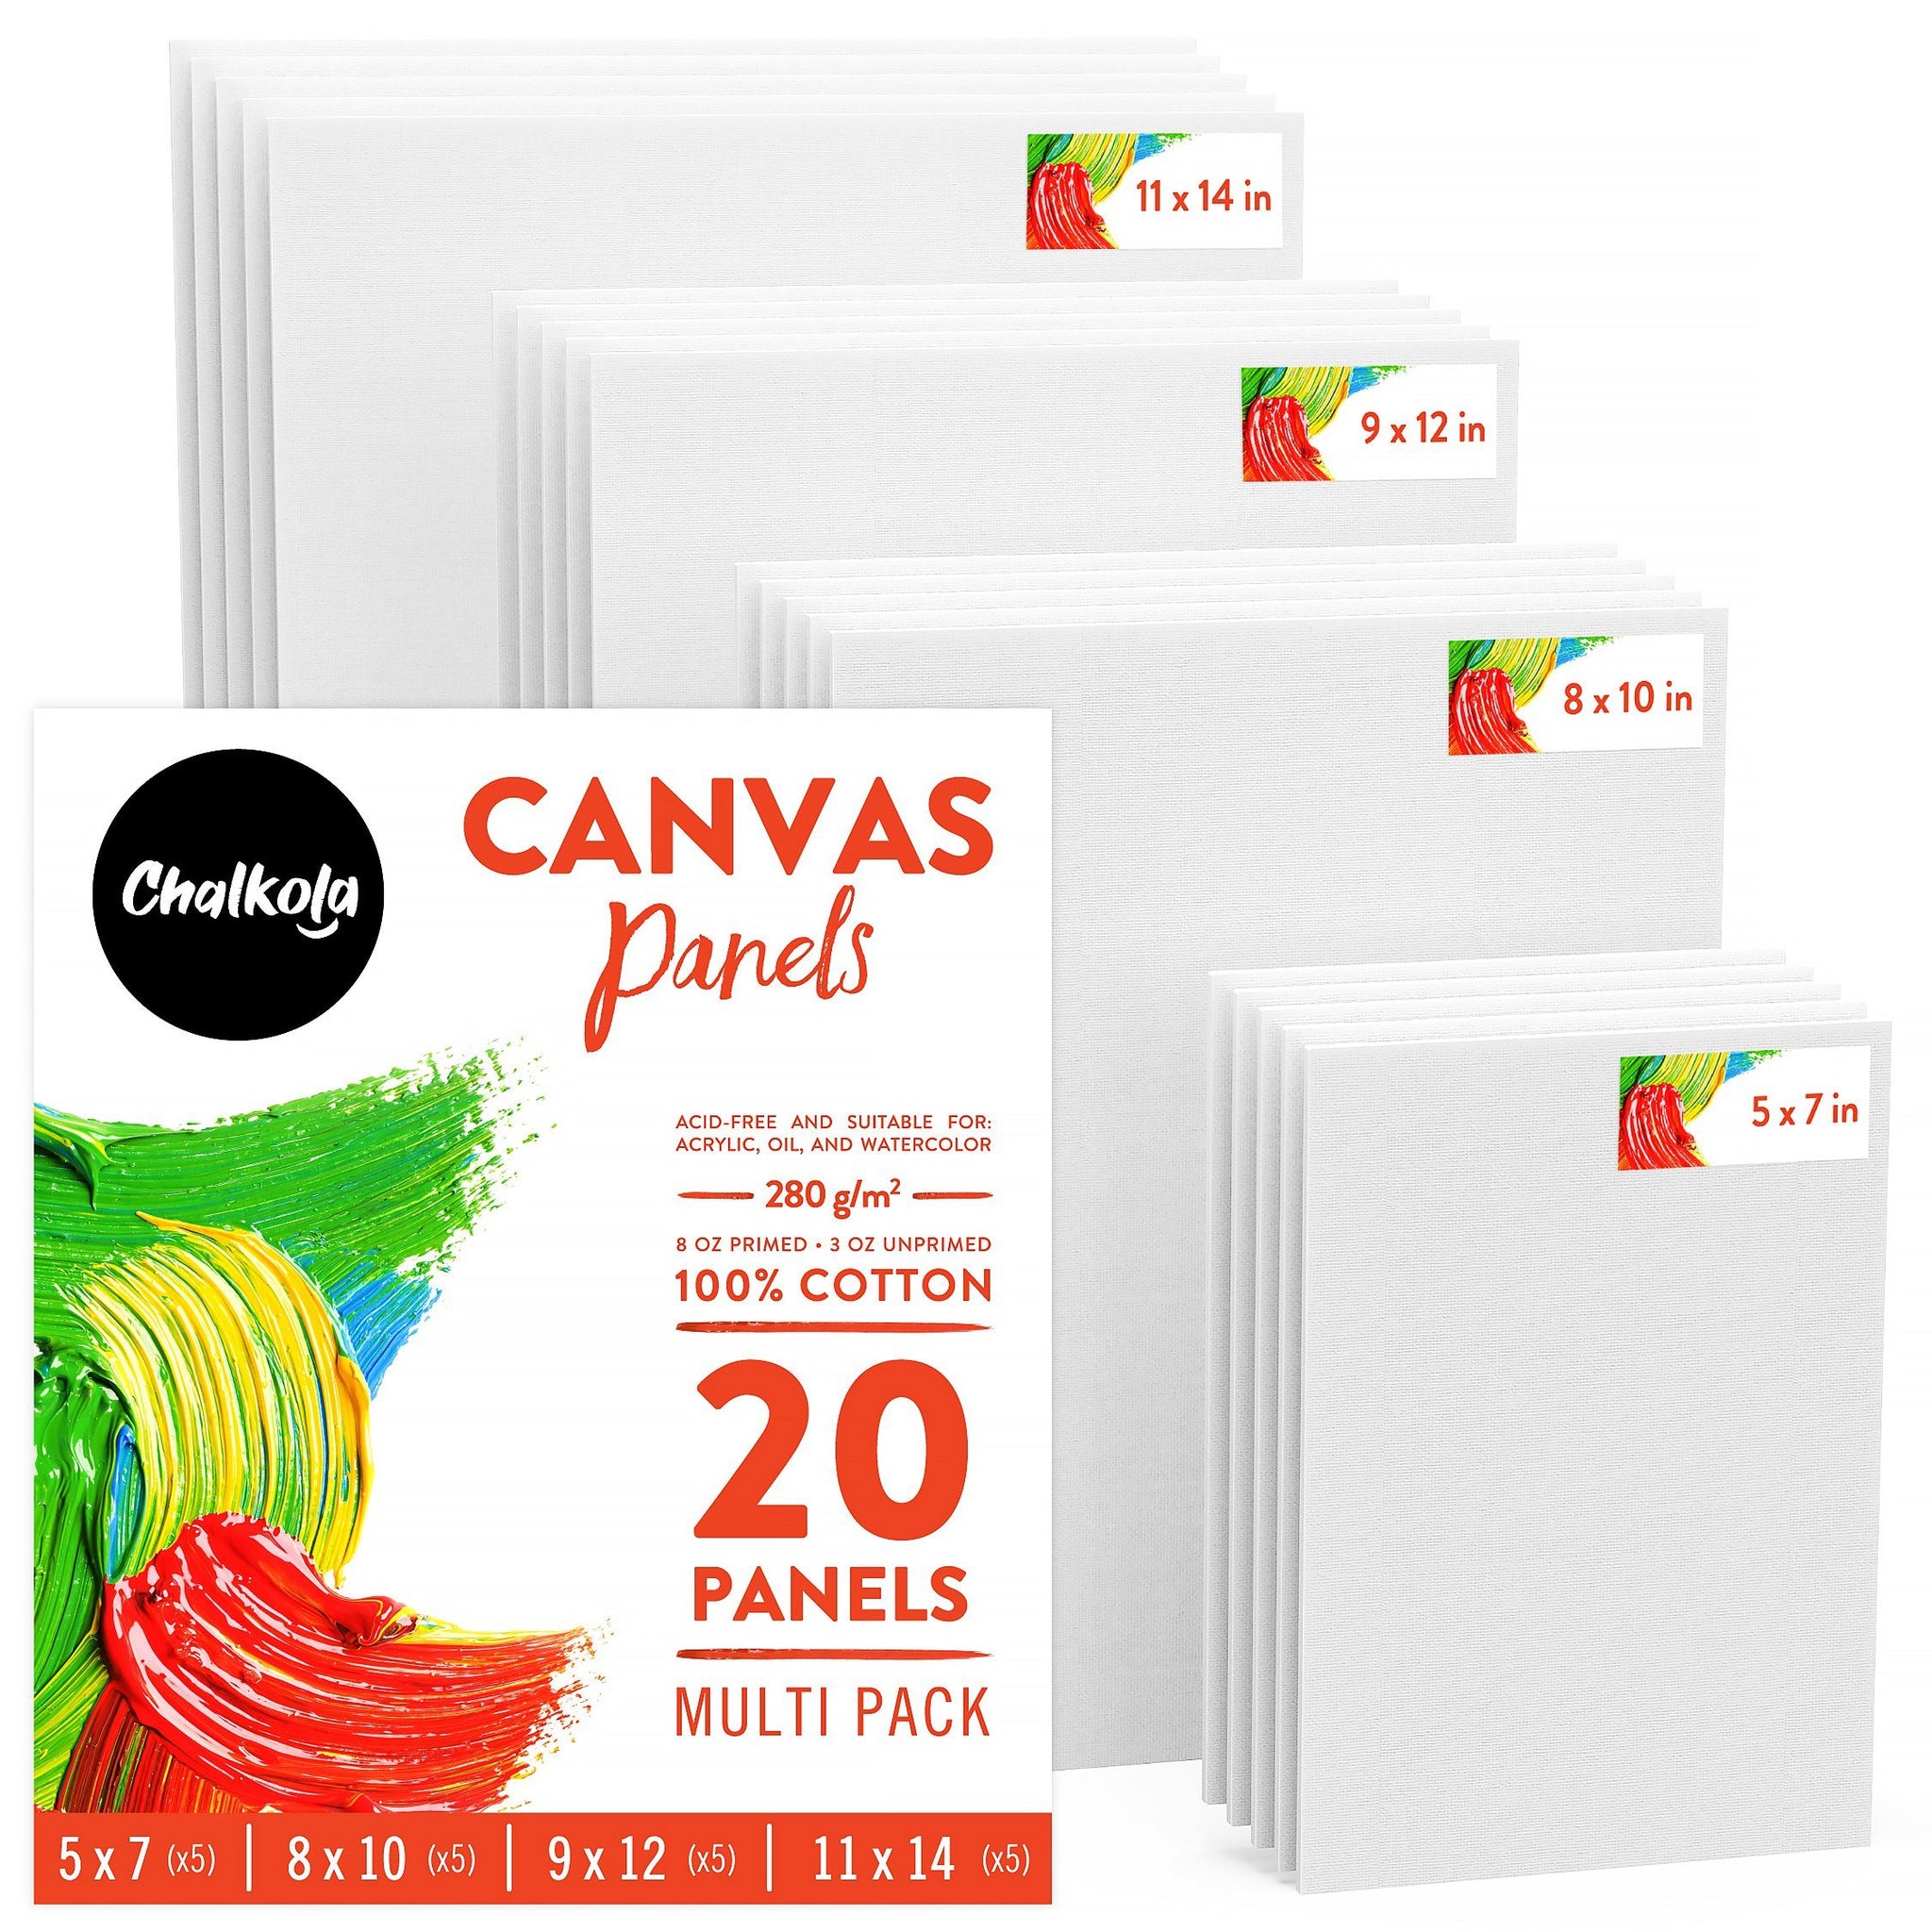 Learn How To Reuse Old Canvas Boards For Fresh New Art!